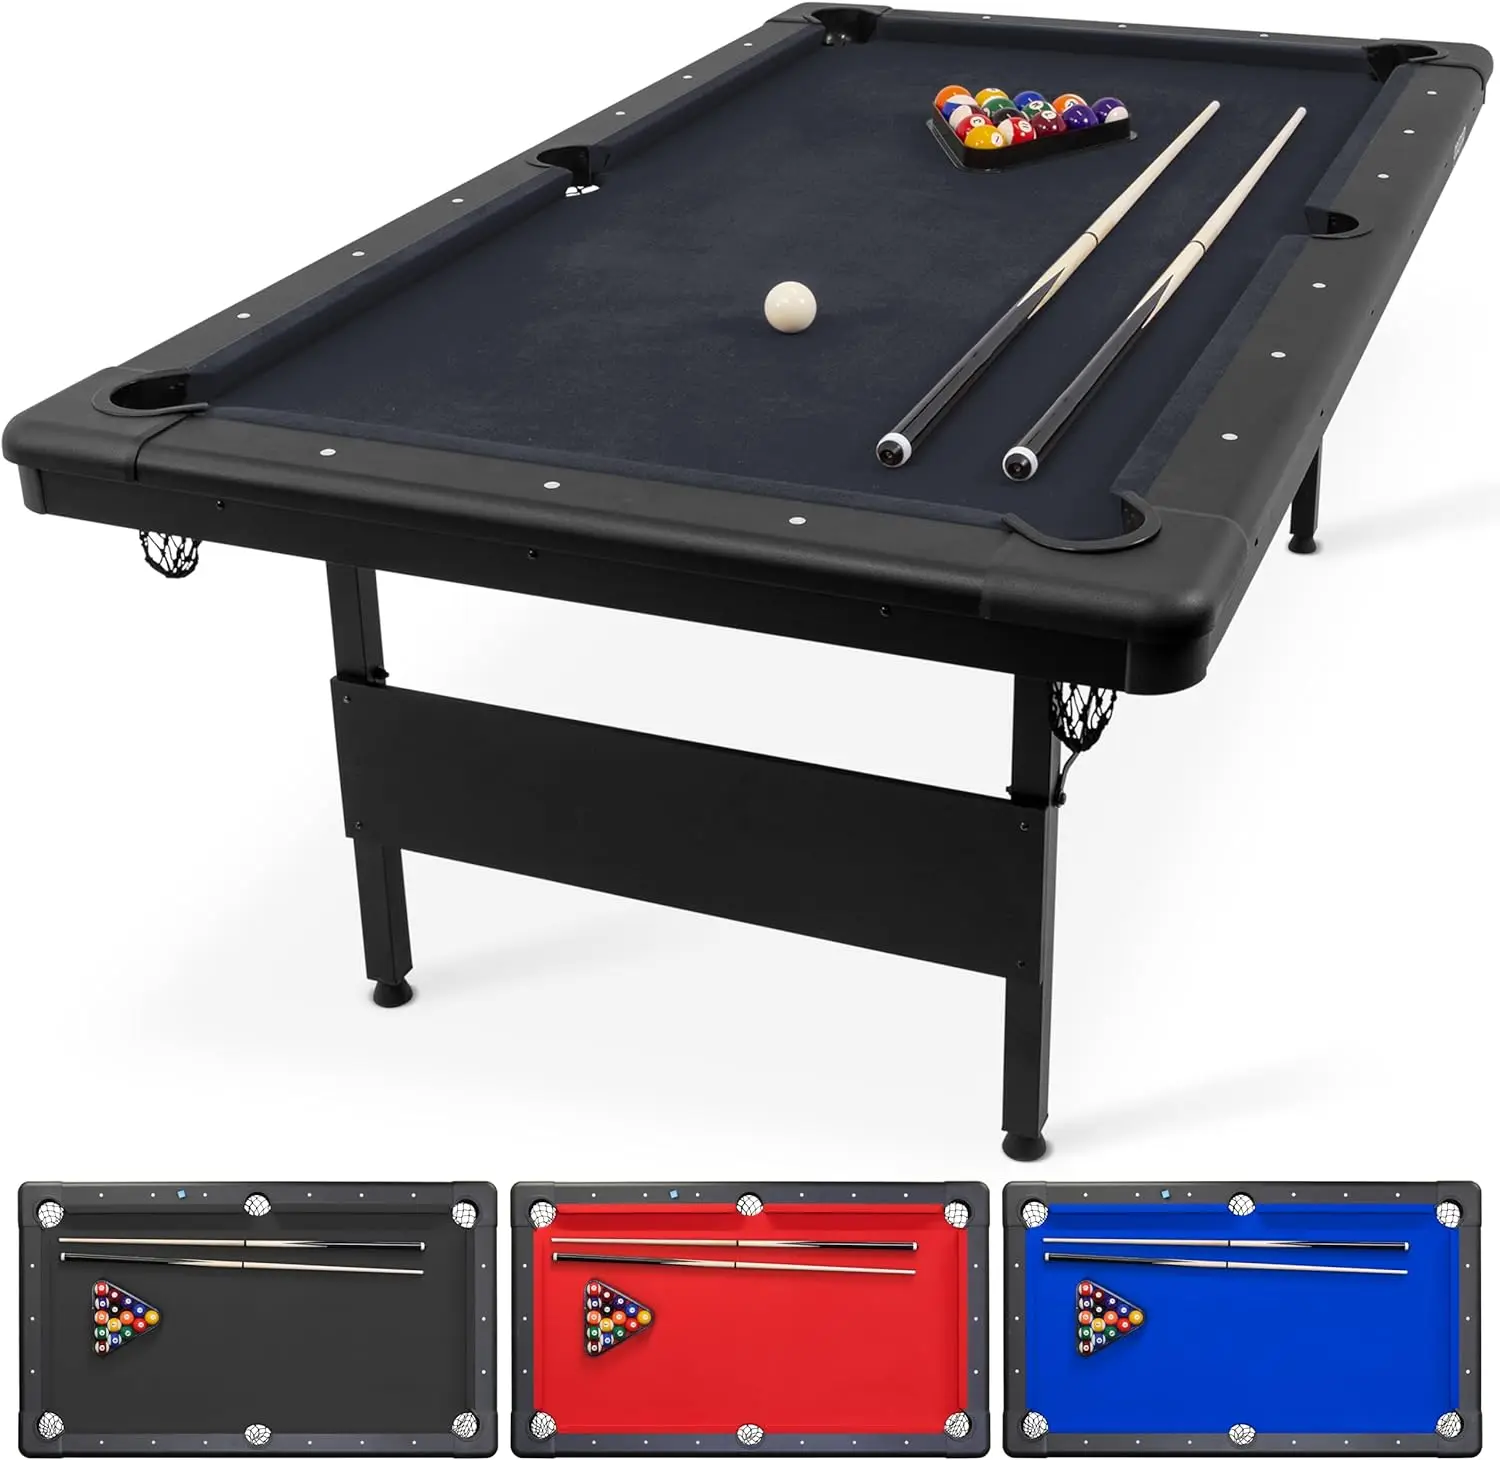 

6, 7, or 8 Ft Billiards Table - Portable Pool Table - Includes Full Set of Balls, 2 Cue Sticks, Chalk and Felt Brush